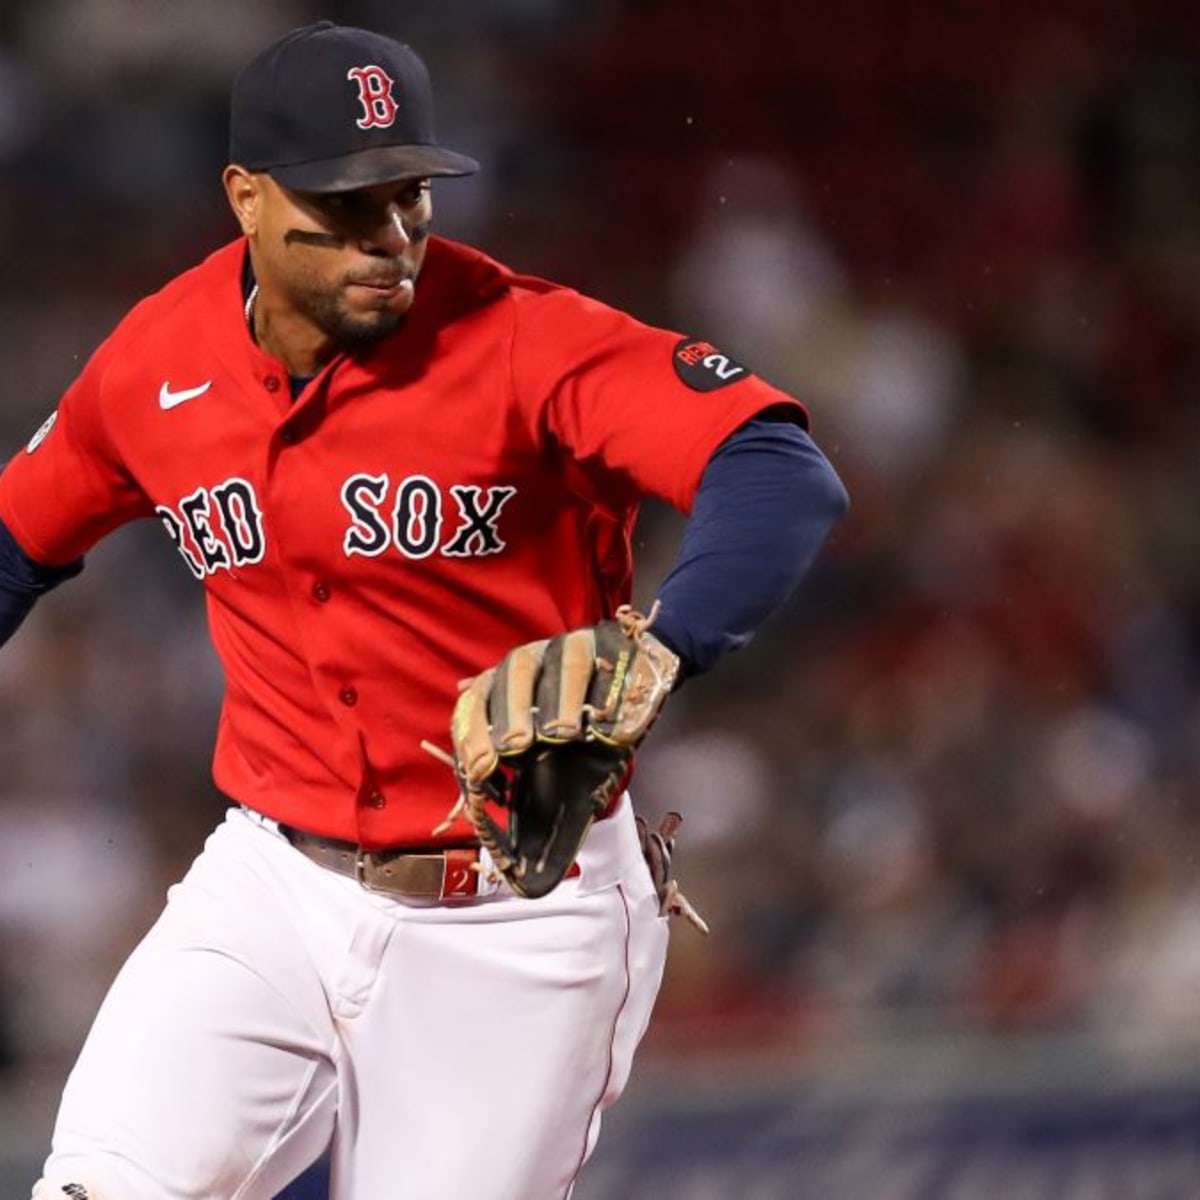 As is tradition, the Red Sox' final offer to Xander Bogaerts was